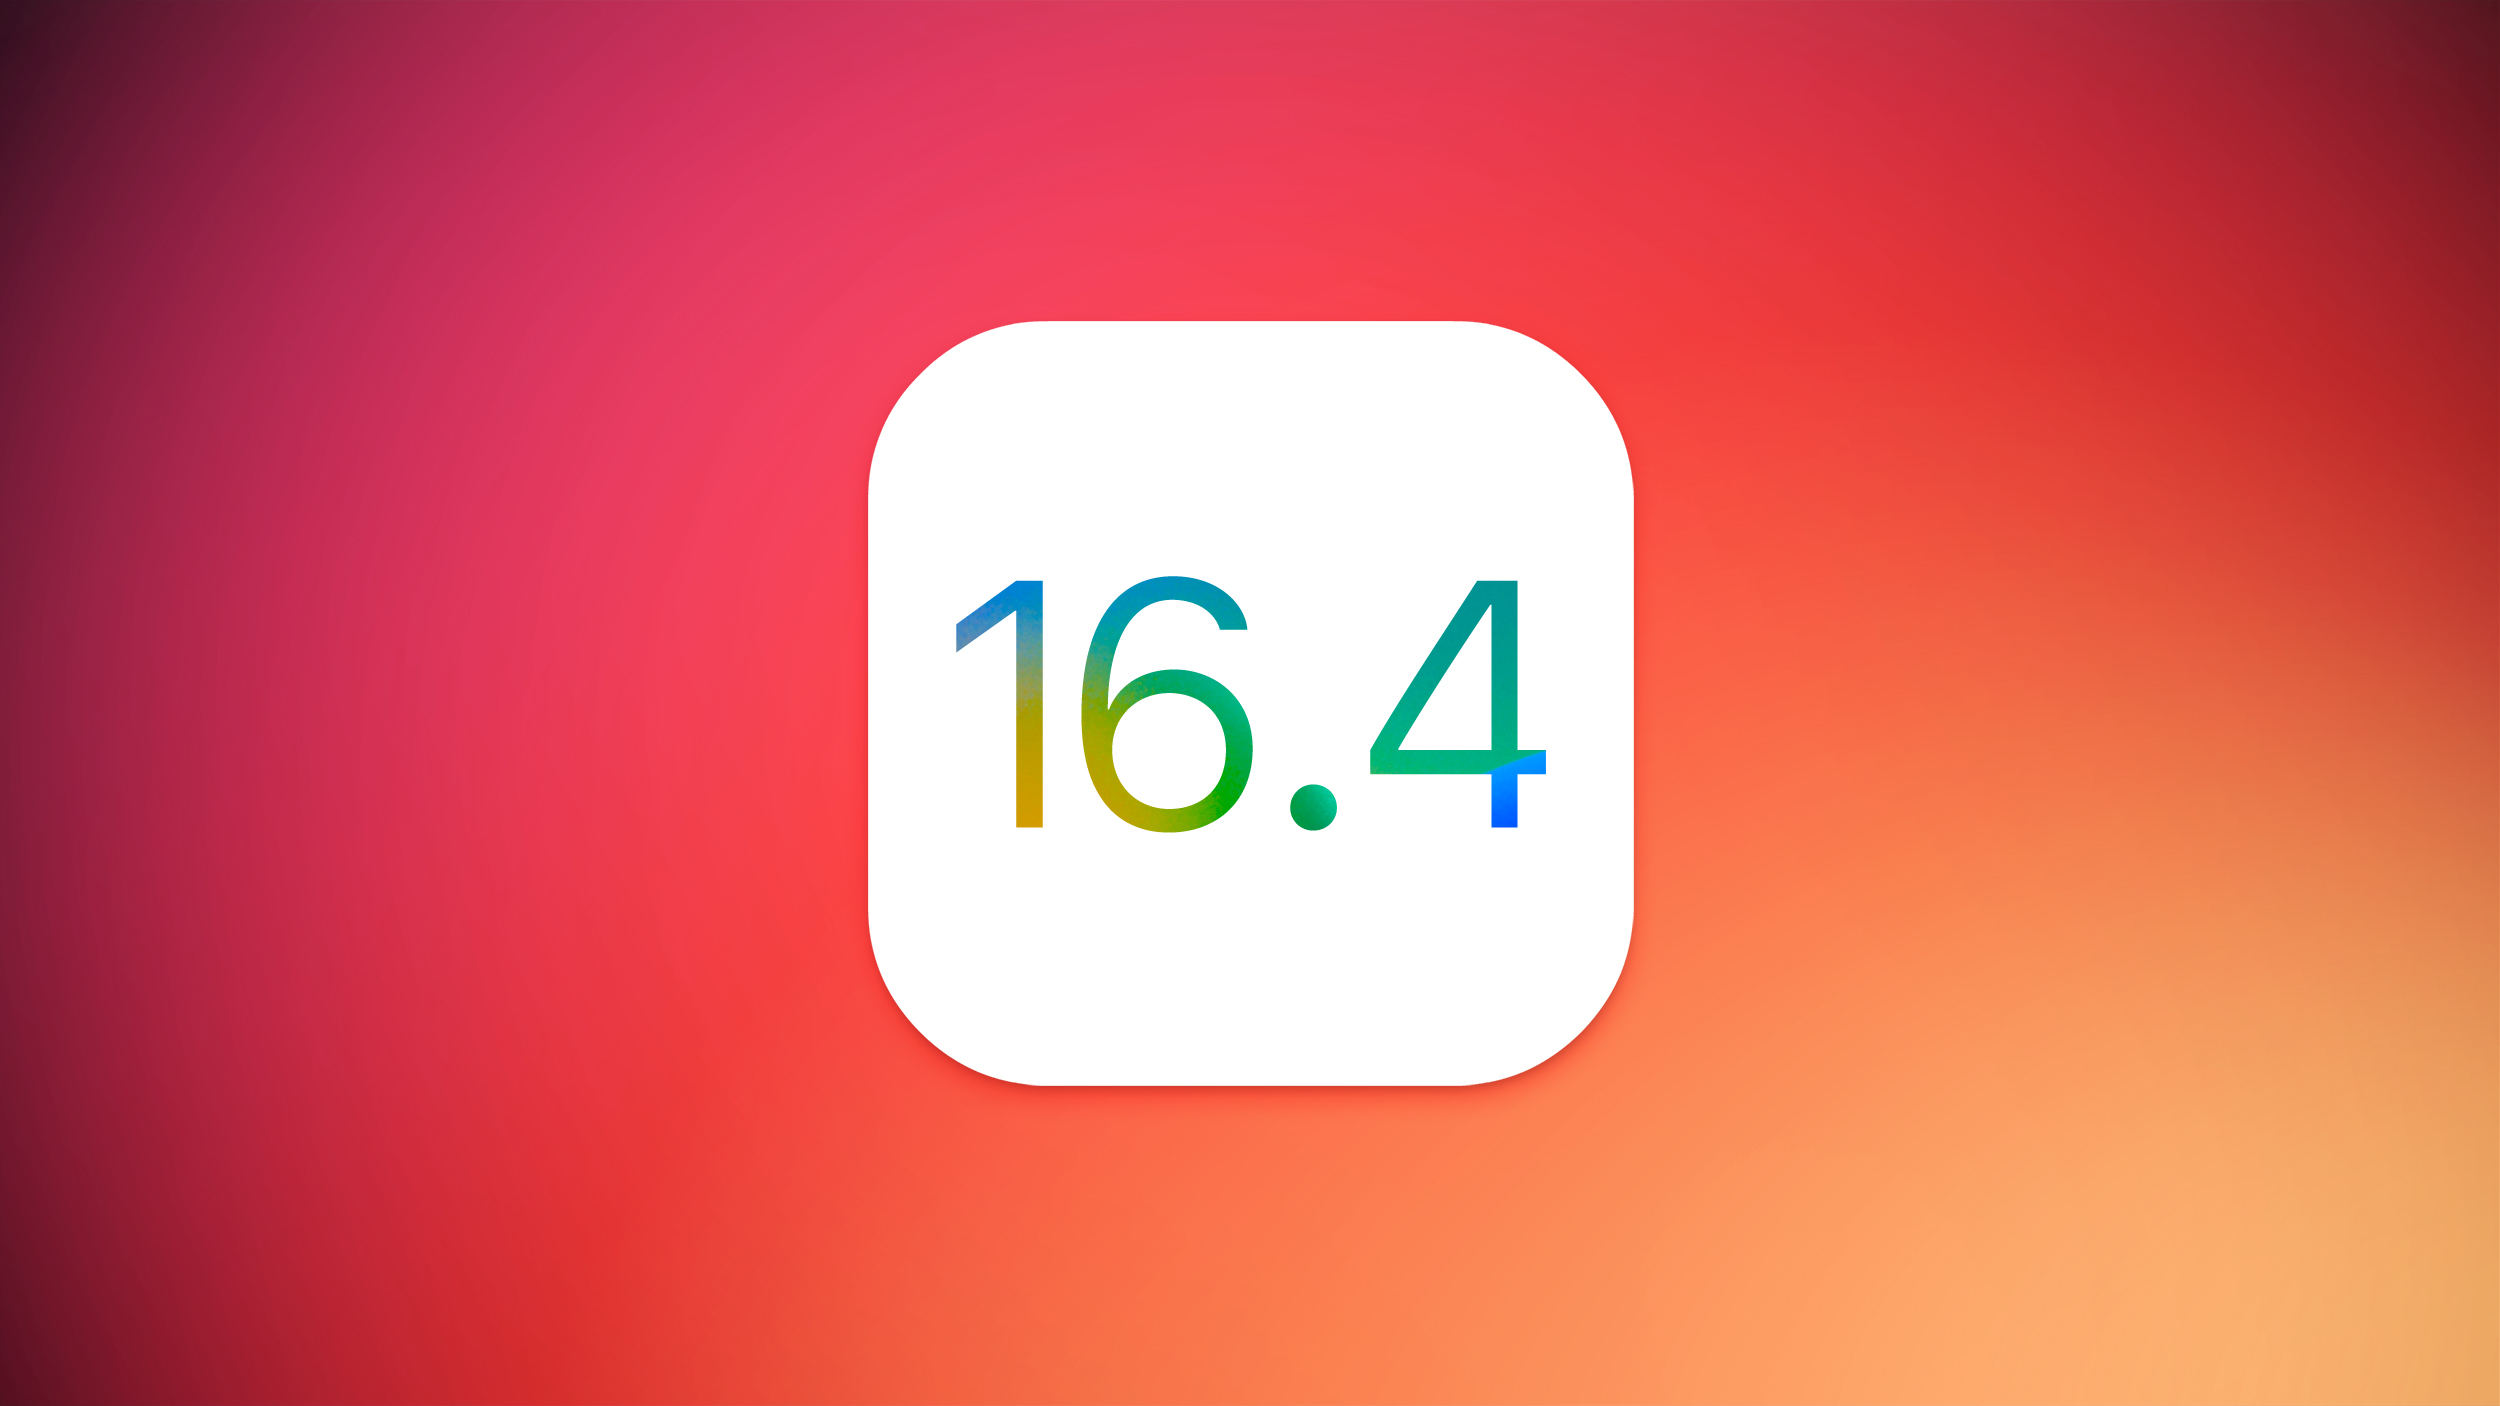 Everything New in iOS 16.4 Beta 2: Apple Books Changes, Apple Music Classical Mentions, Apple Pay in South Korea and More